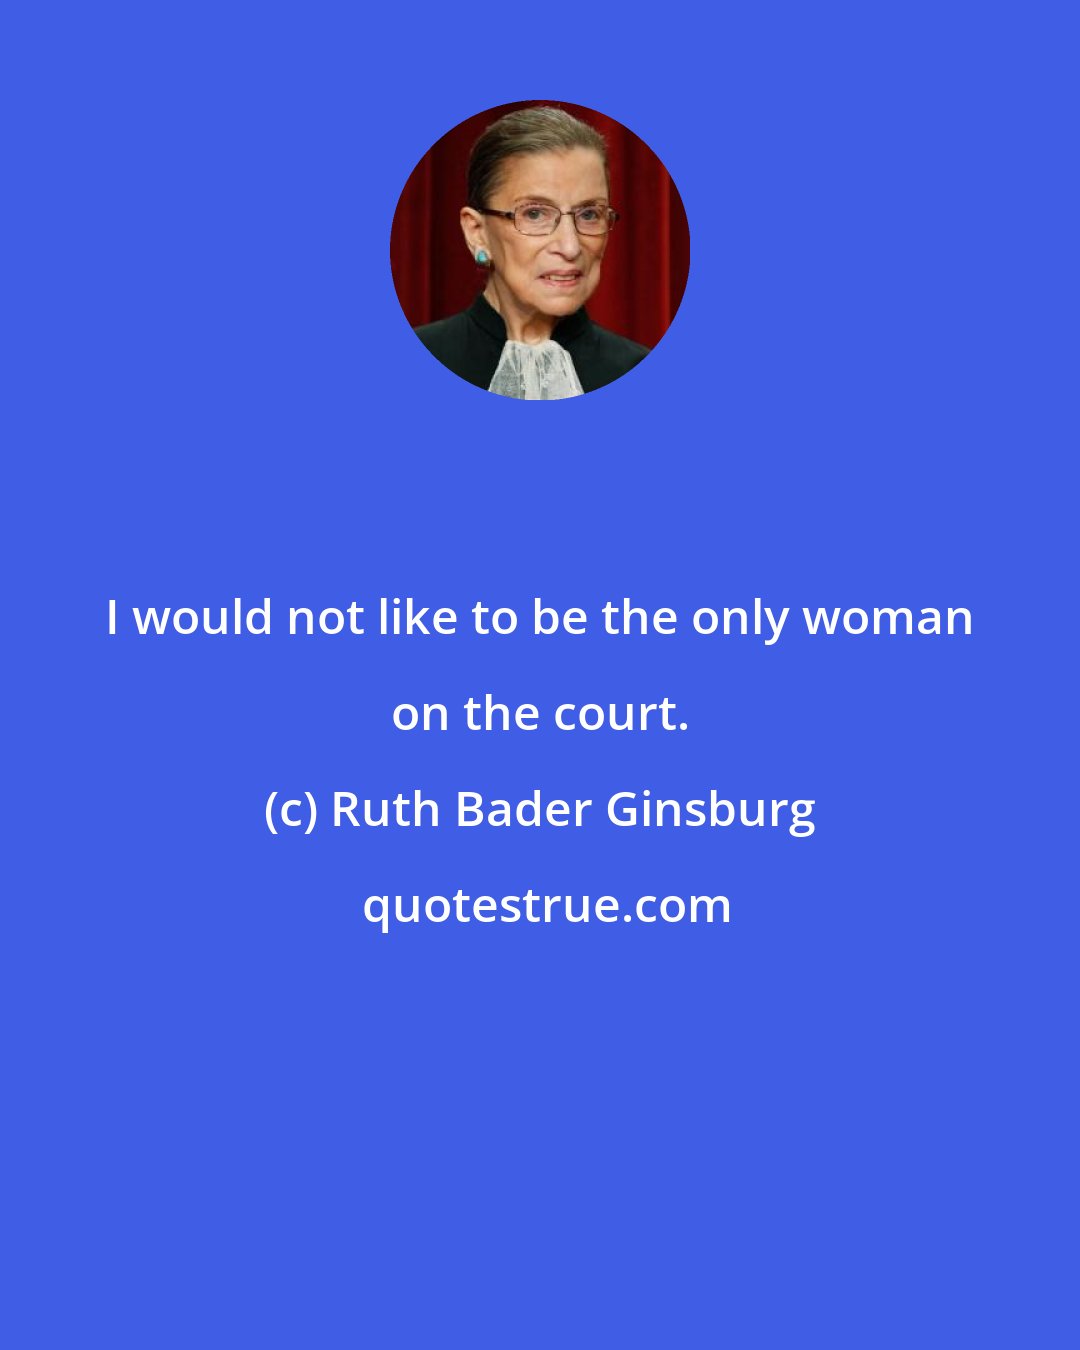 Ruth Bader Ginsburg: I would not like to be the only woman on the court.